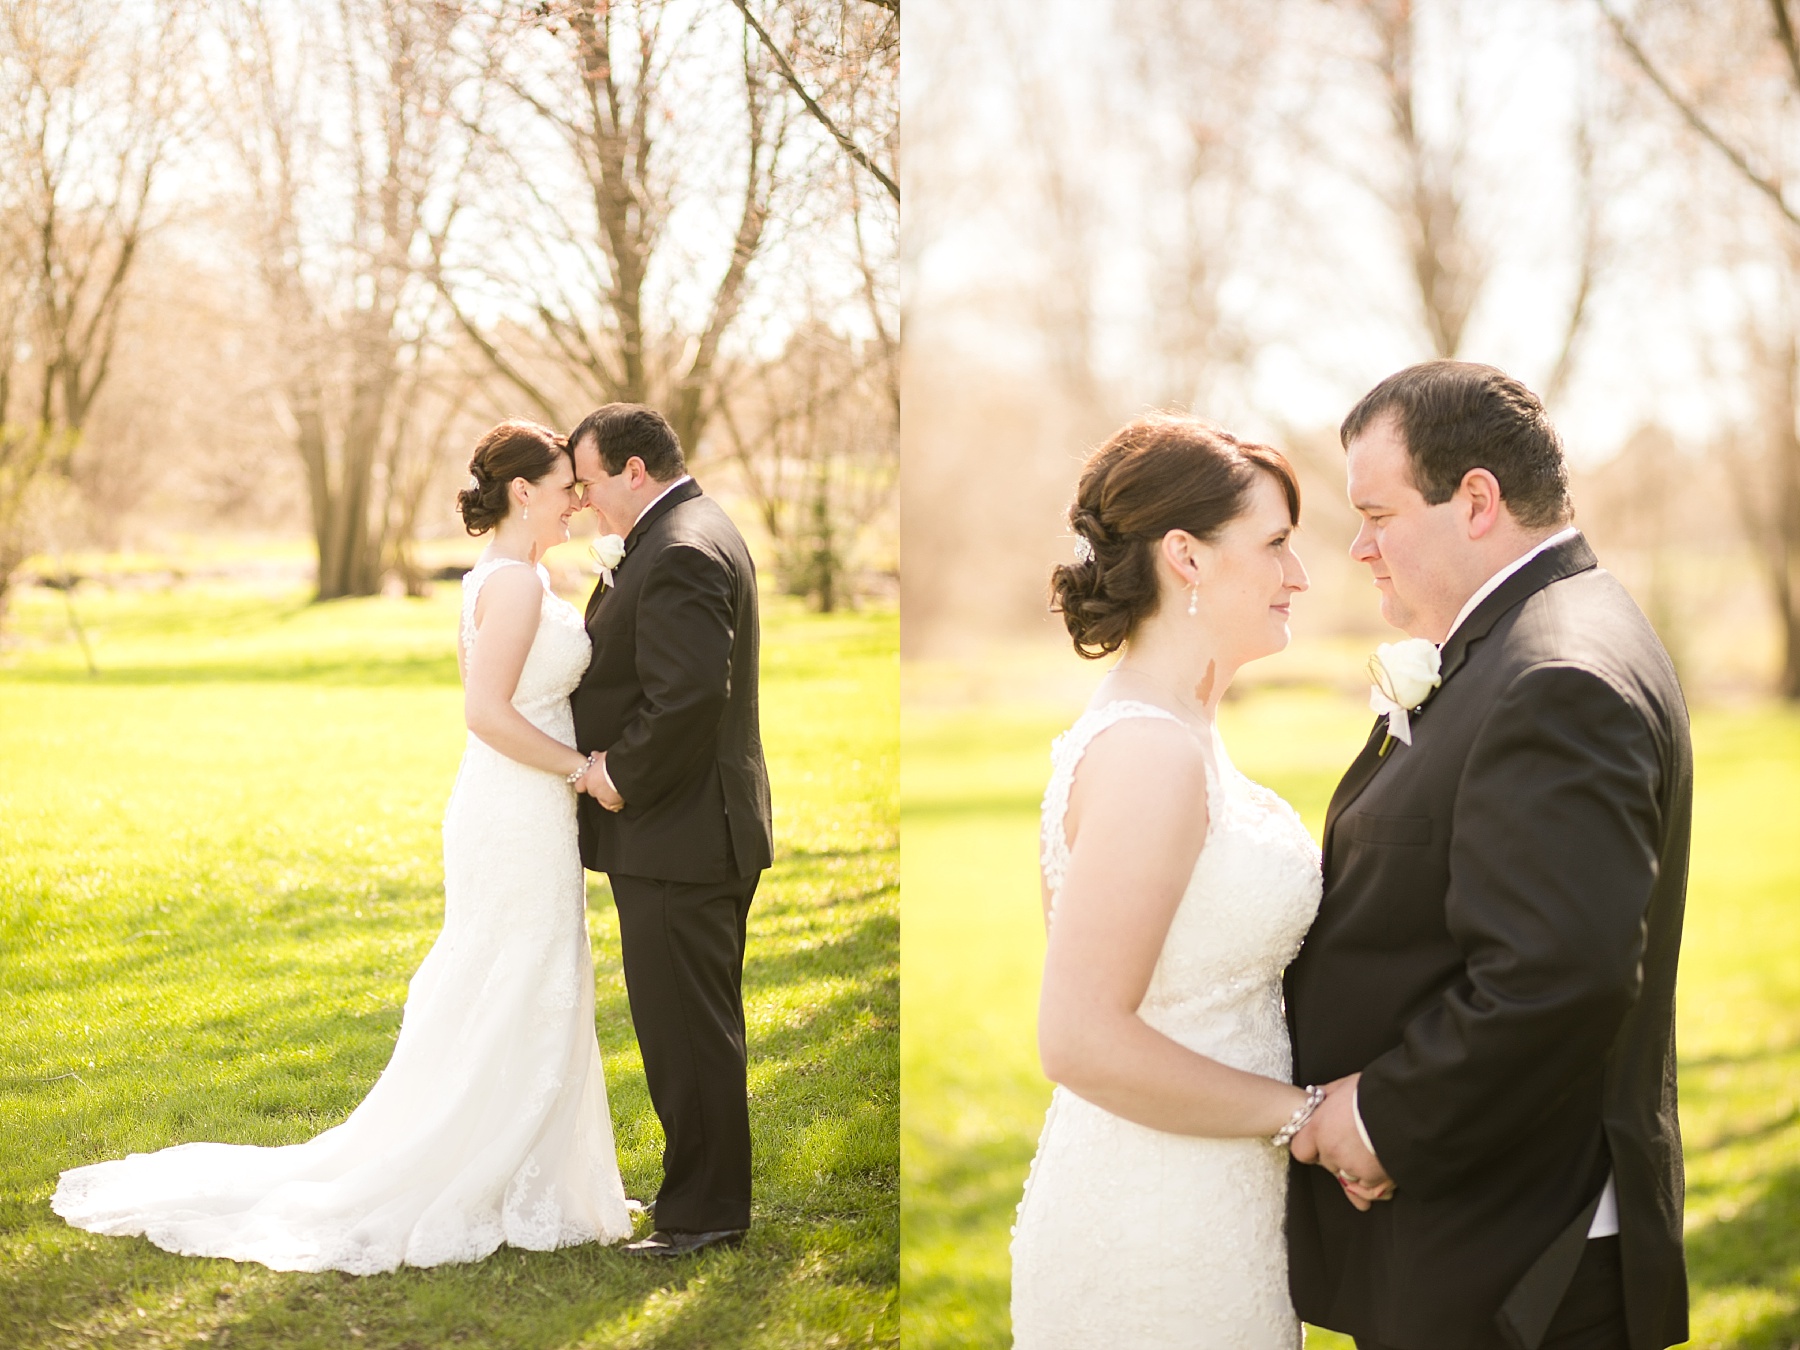 A beautiful spring wedding set in Samantha's hometown, these two had the perfect amount of sunshine to celebrate with.